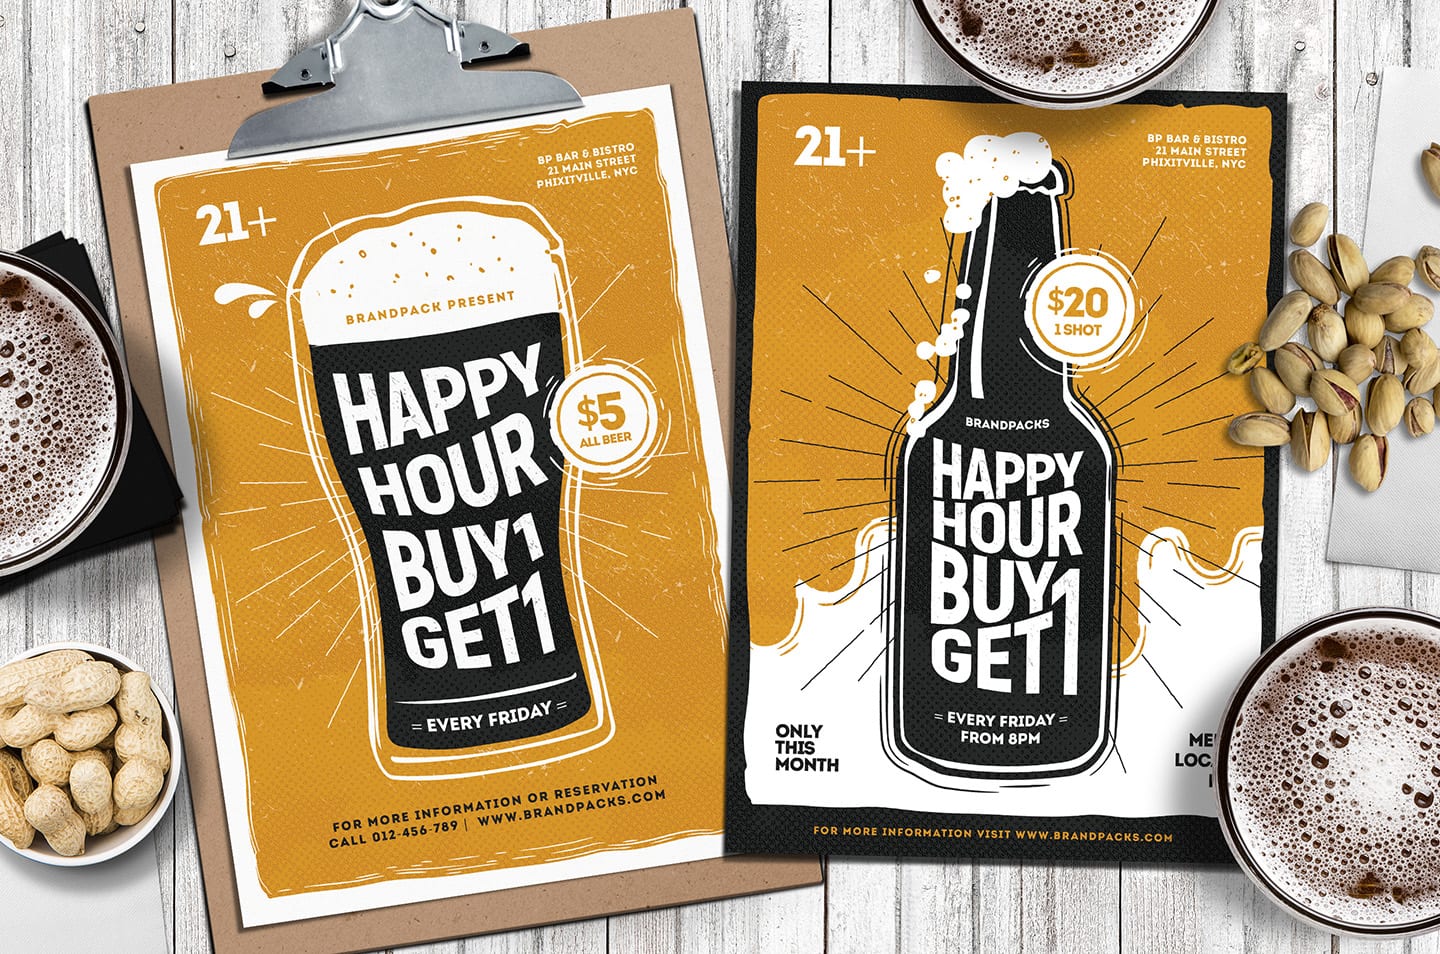 Happy Hour Poster Template